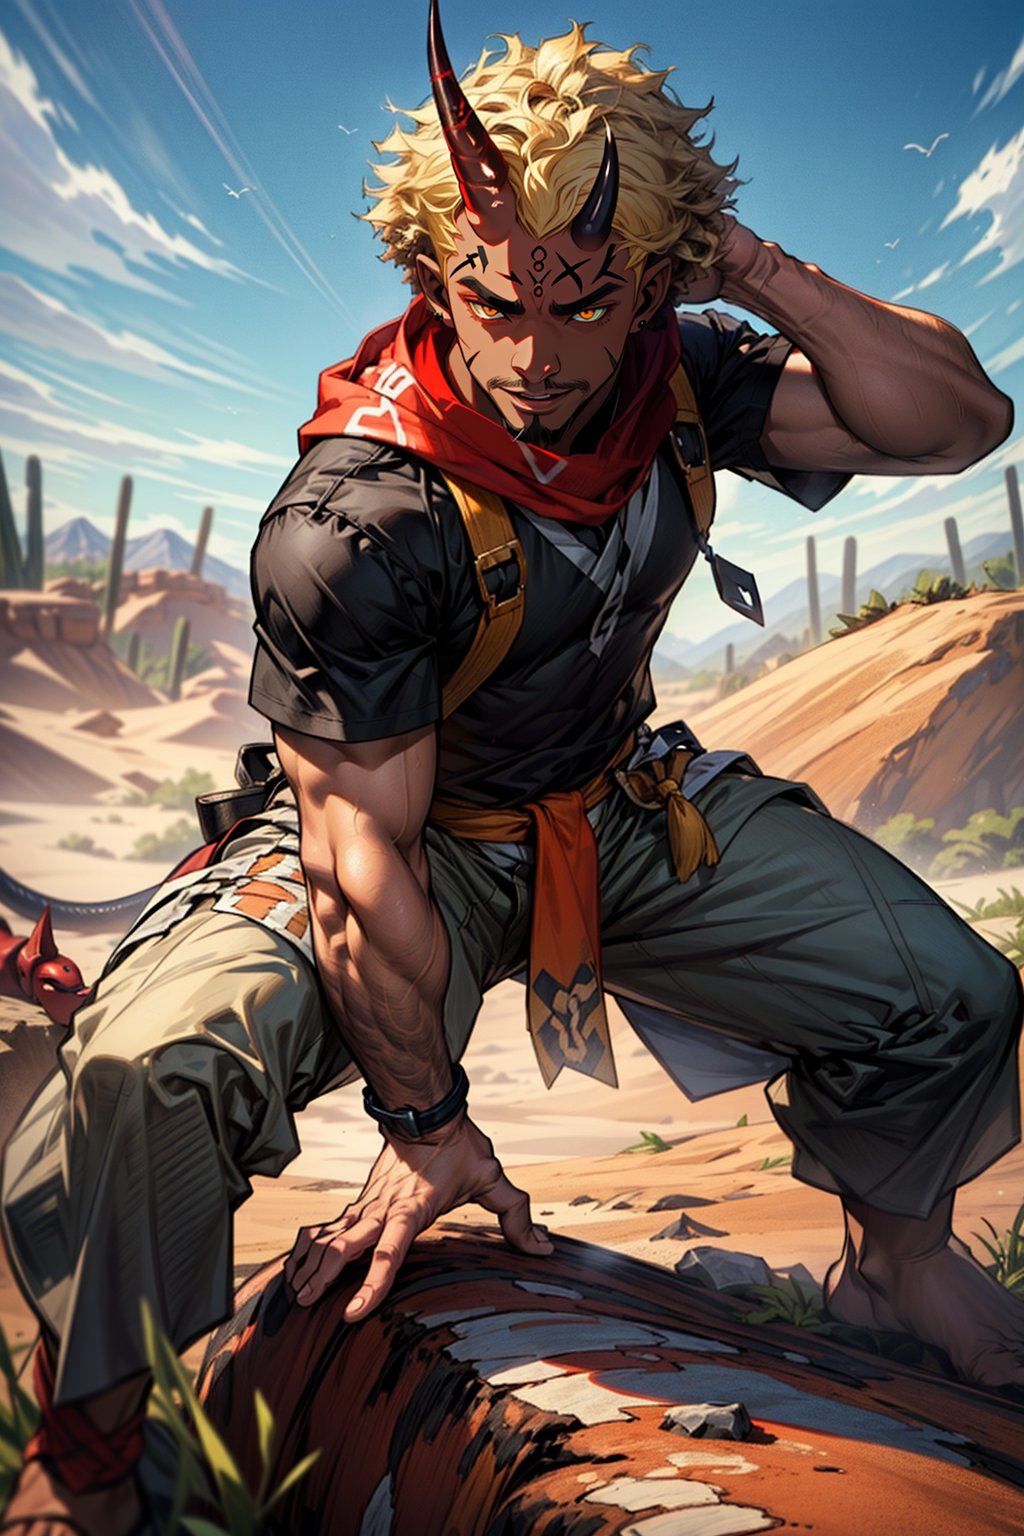 (((2 demon horn on the forehead))), (incredibly big afro hairstyle), african male , half human, brown beard, ((blond hair)), (snake-tail), ((held of African tribe)), african clothes, old man, adult, male, (dark skin tone), scarf with a hood, desert in the background, dynamic pose, dynamic view, battle_stance
,red \(pokemon\)